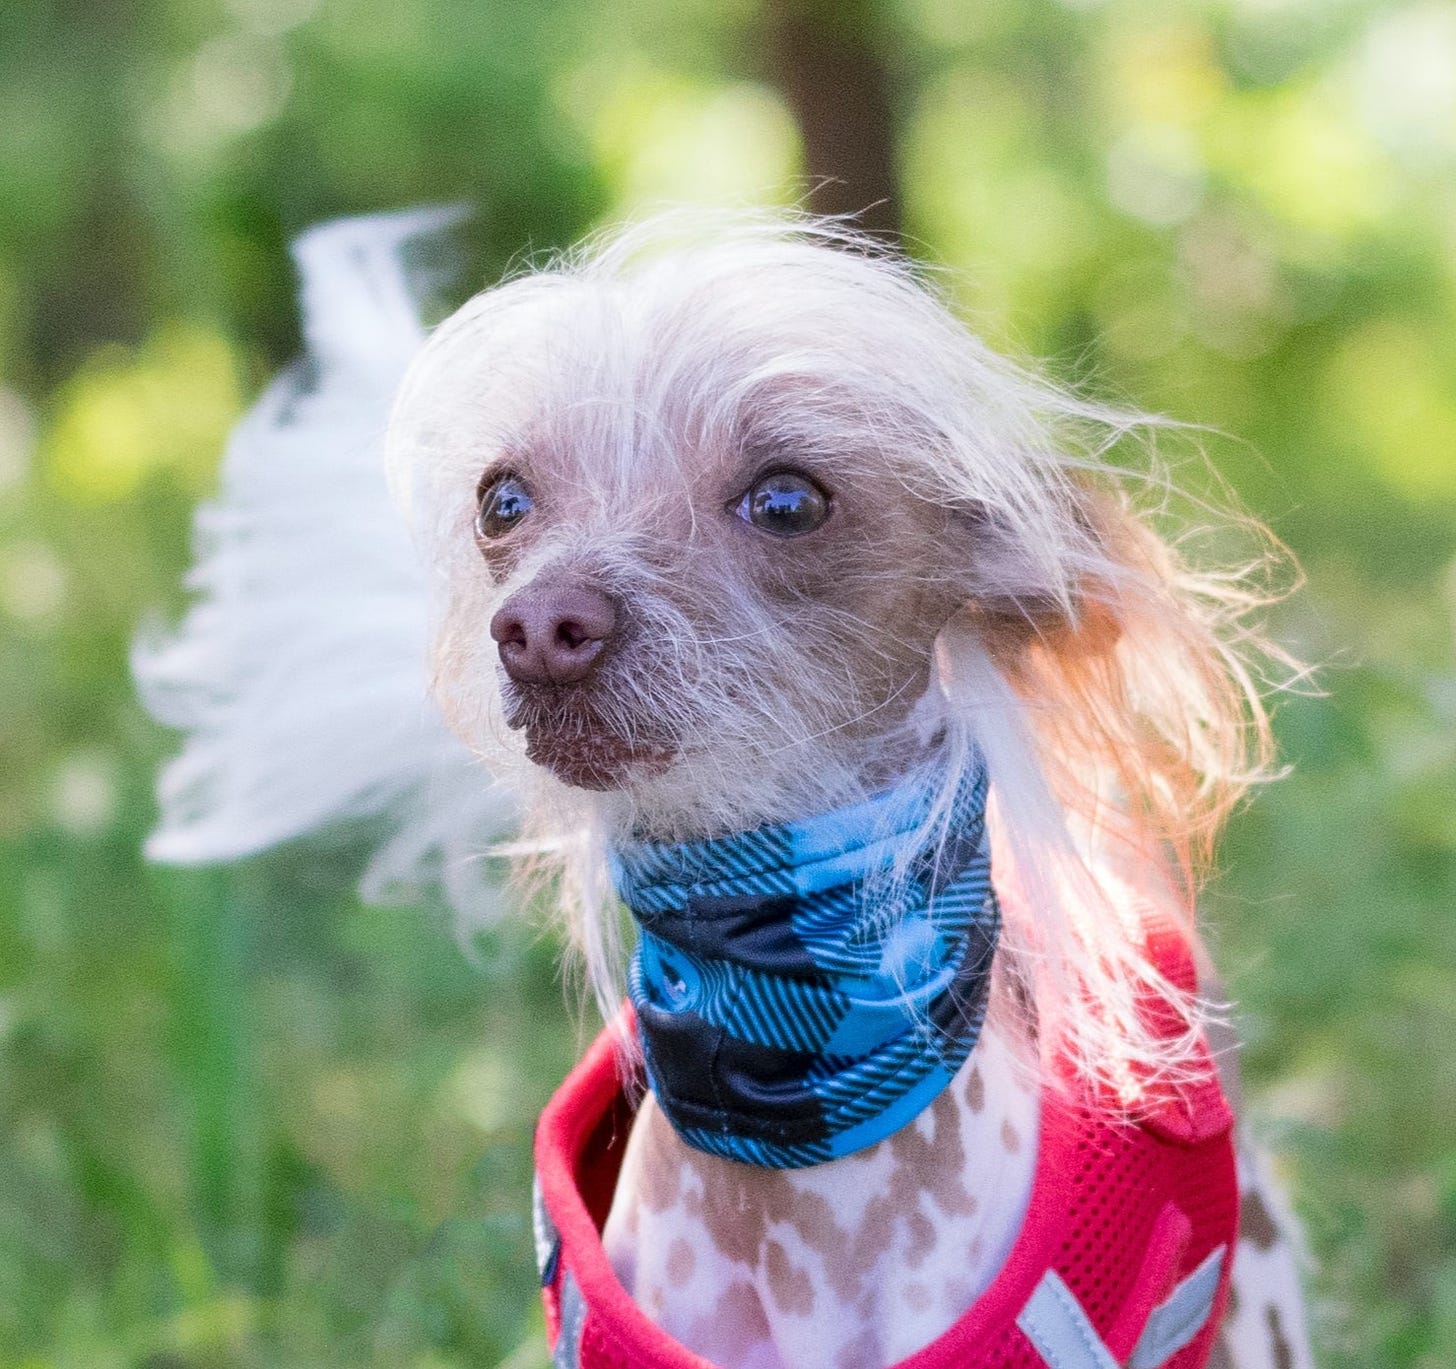 Chinese crested dog outside staring longingly at camera